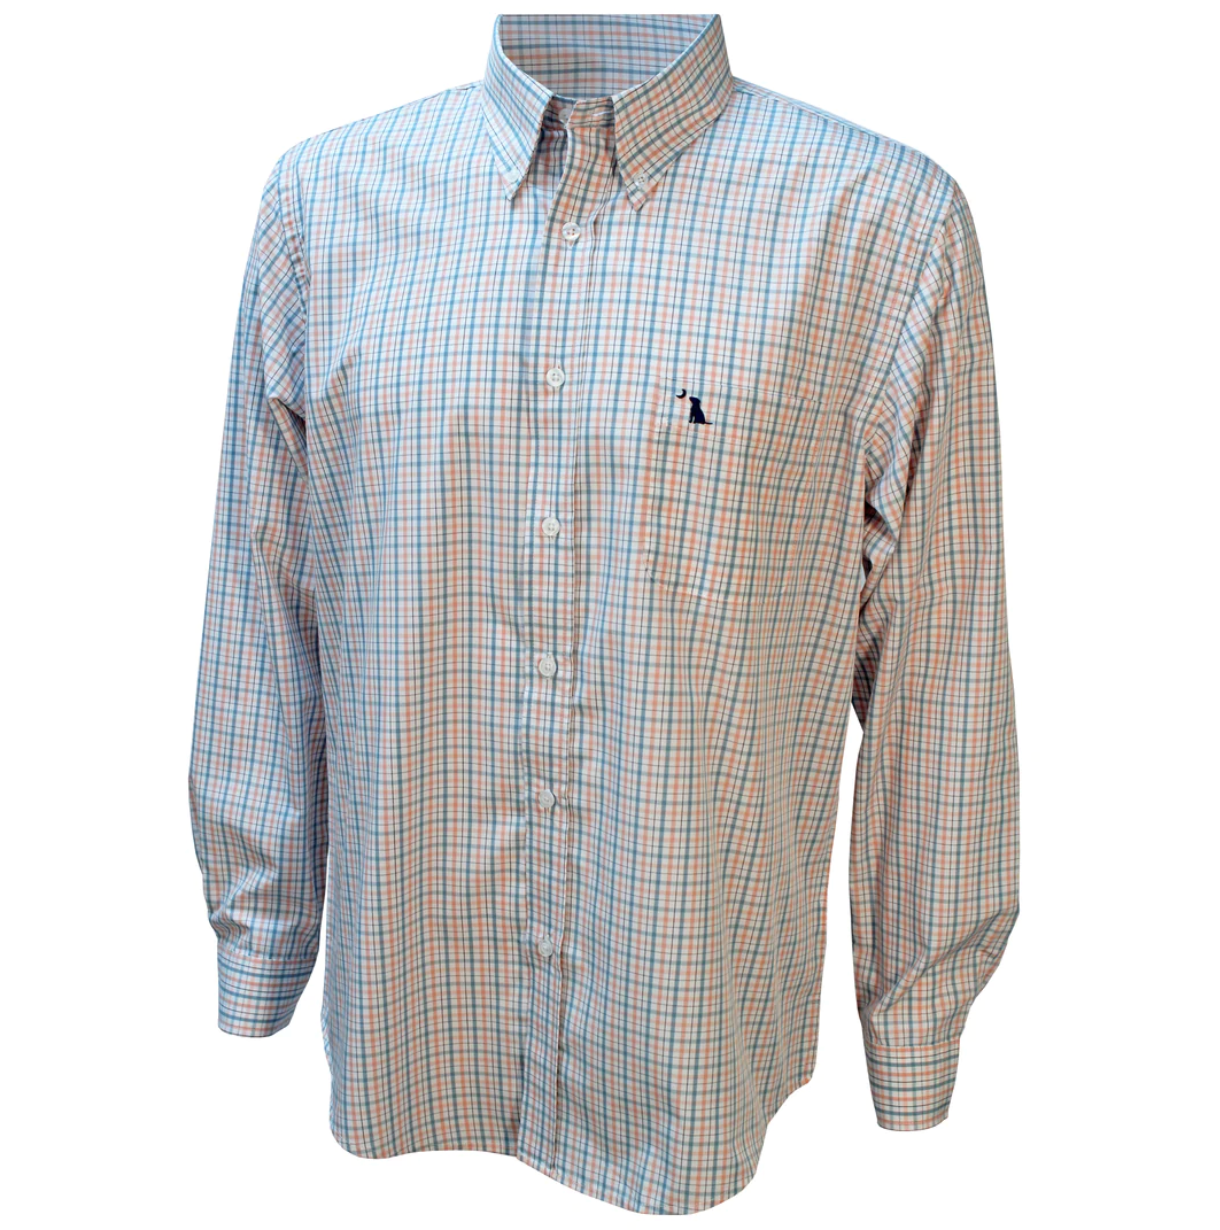 LOCAL BOY OUTFITTERS TAYLOR DRESS SHIRT CORAL BLUE/GREY***